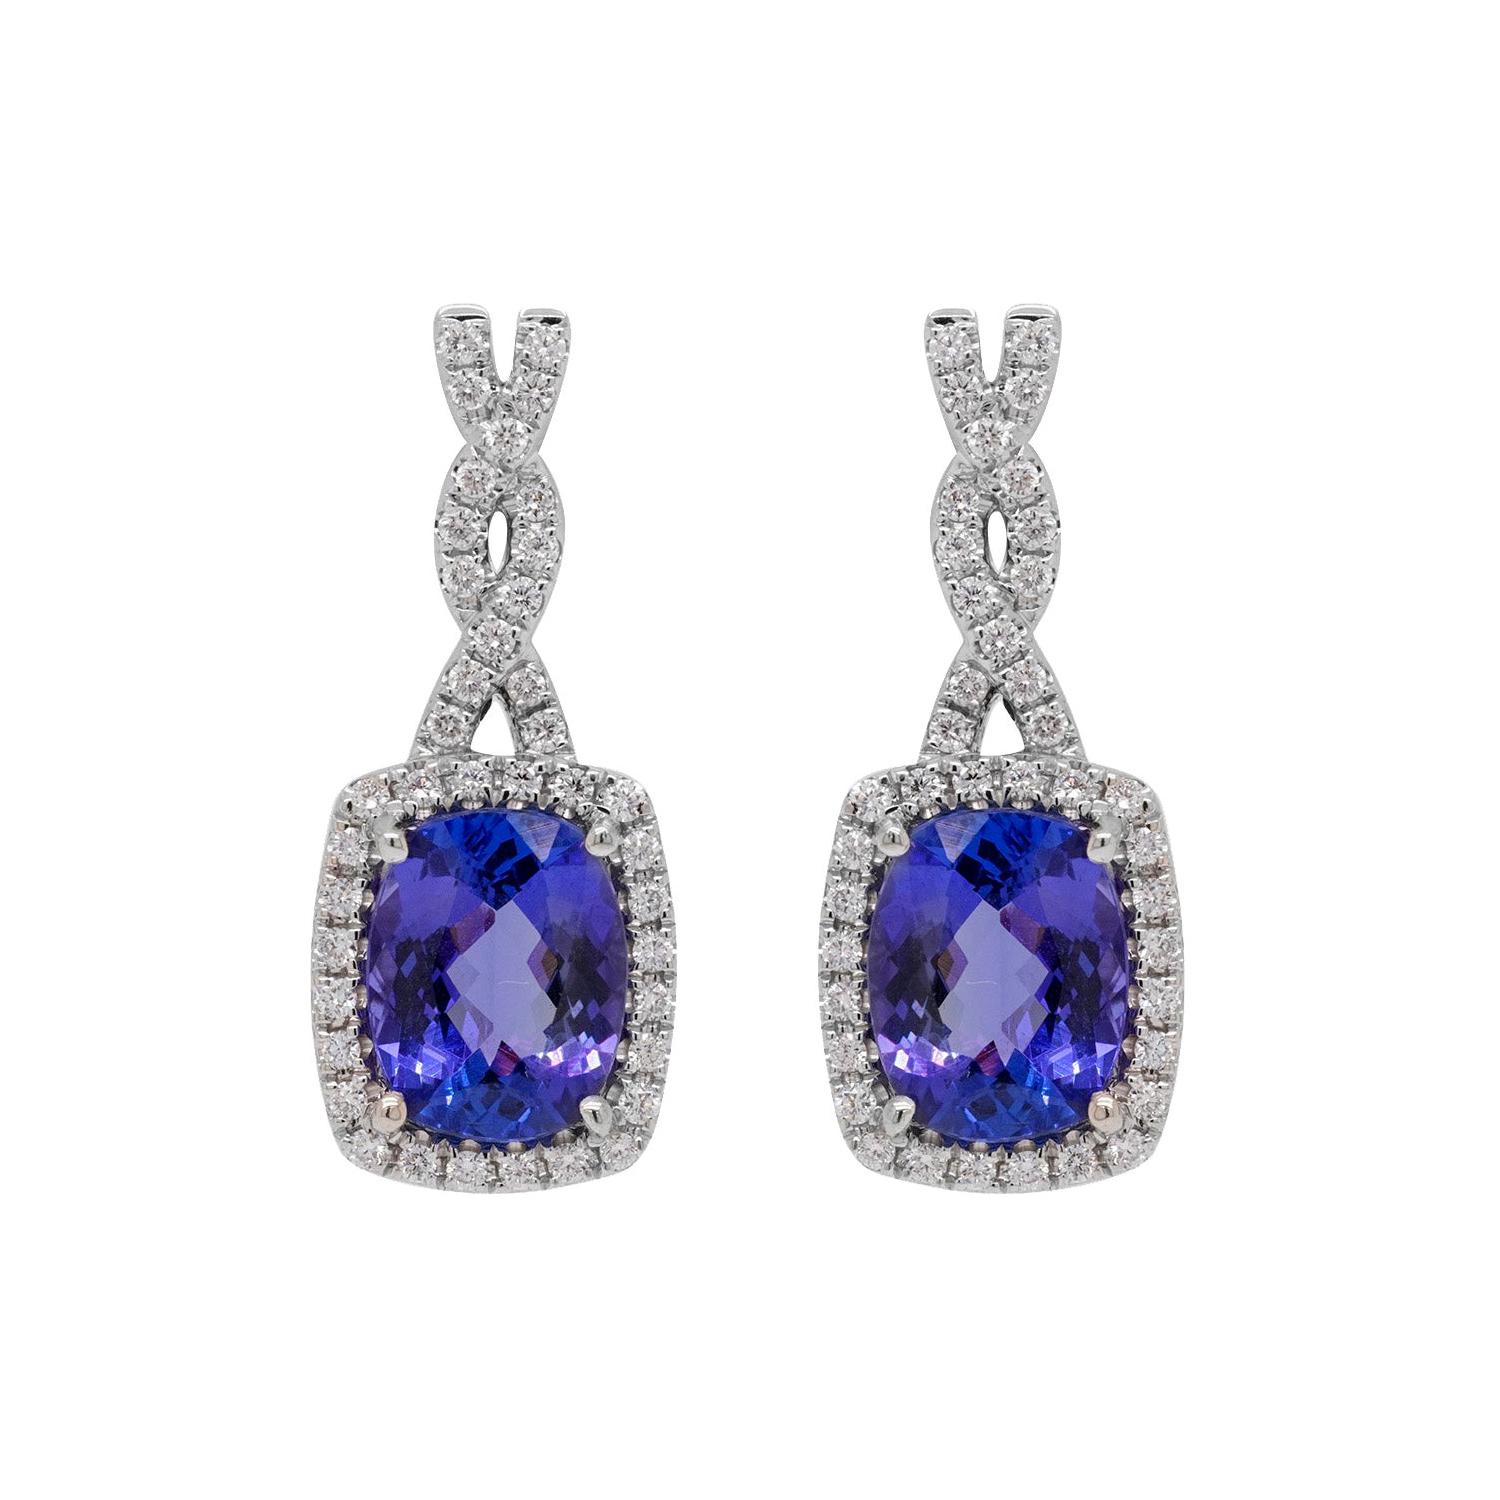 Gem Bleu 3.99tct Tanzanite Earrings with 0.45 Tct Diamonds Set in 18k White Gold For Sale